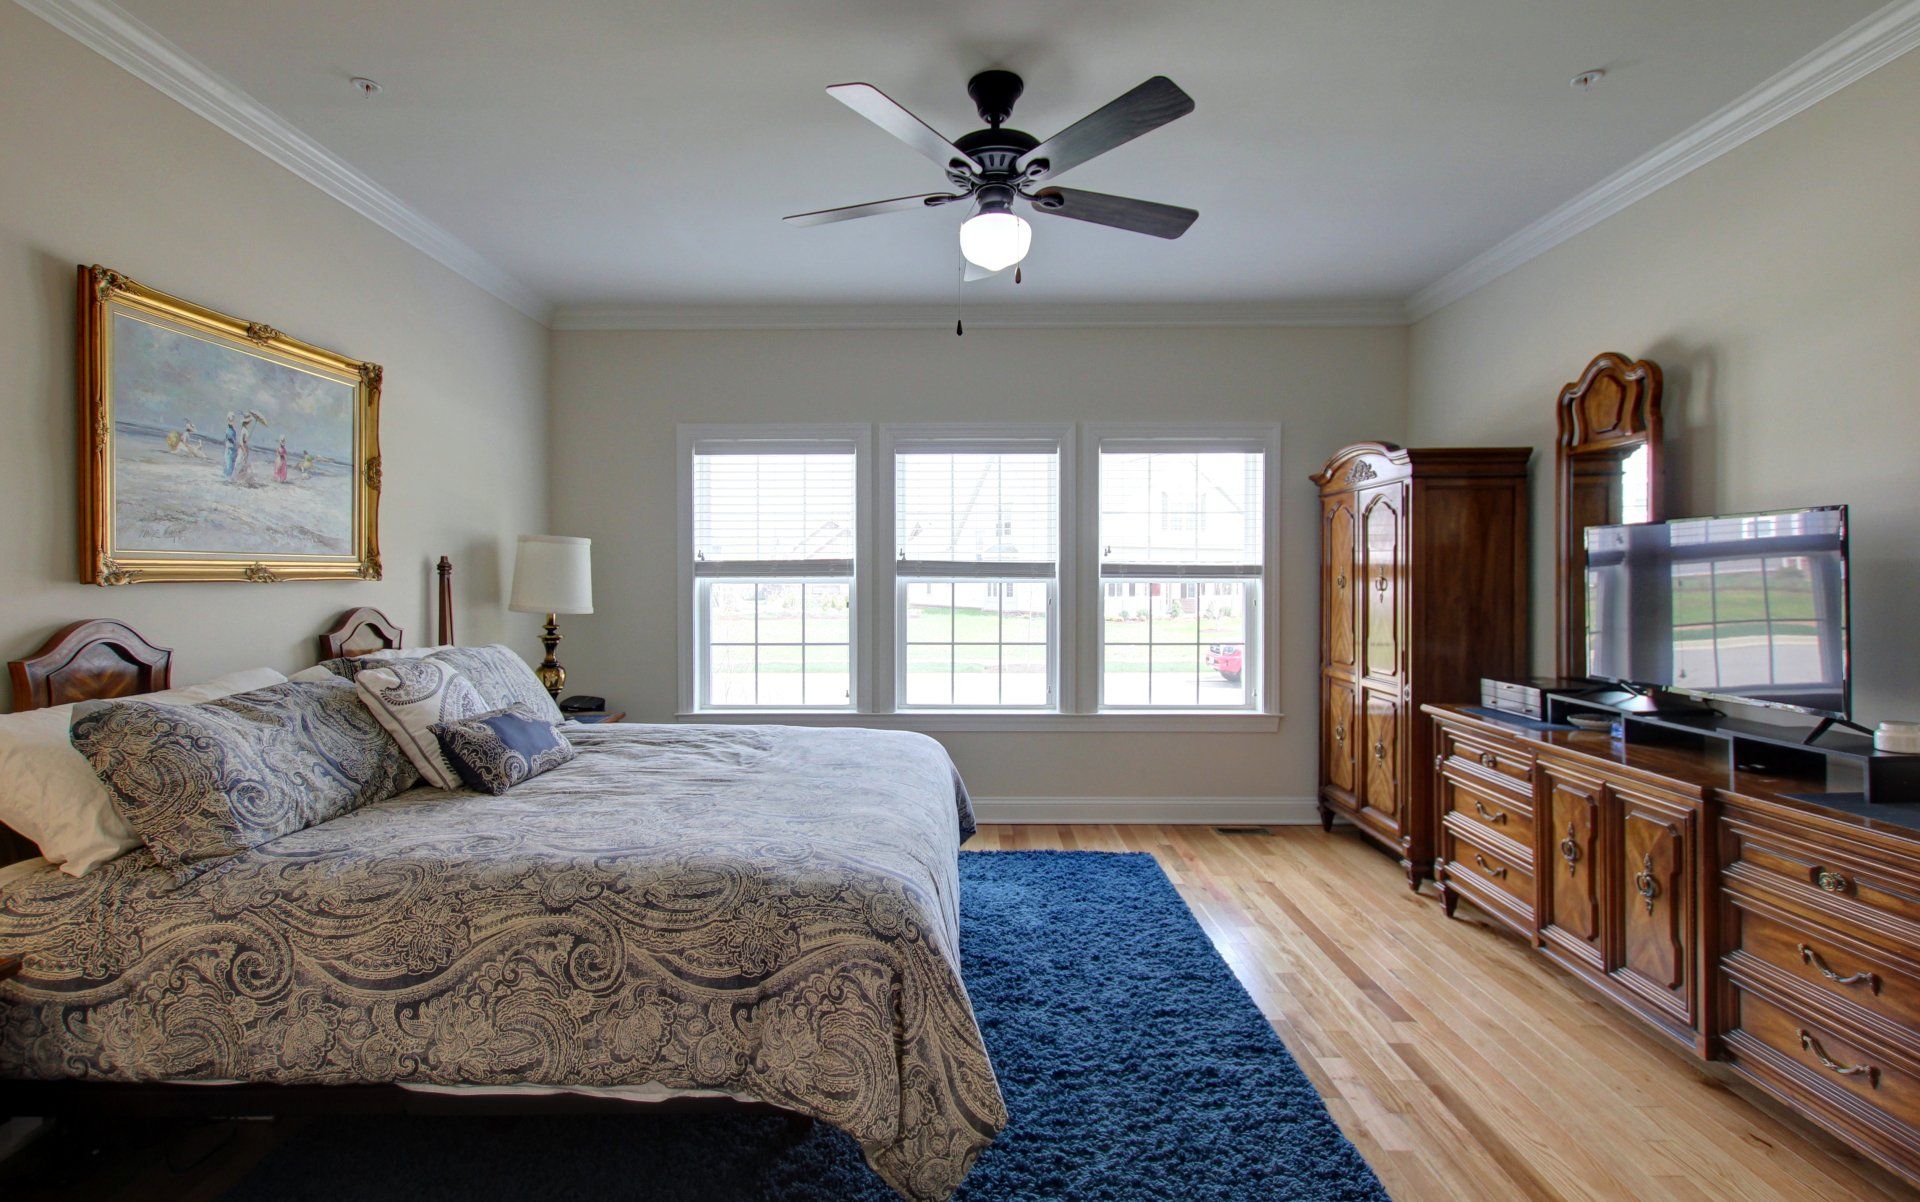 Bedroom | Galveston Legacy | Covell Communities | Chester, Maryland 21619